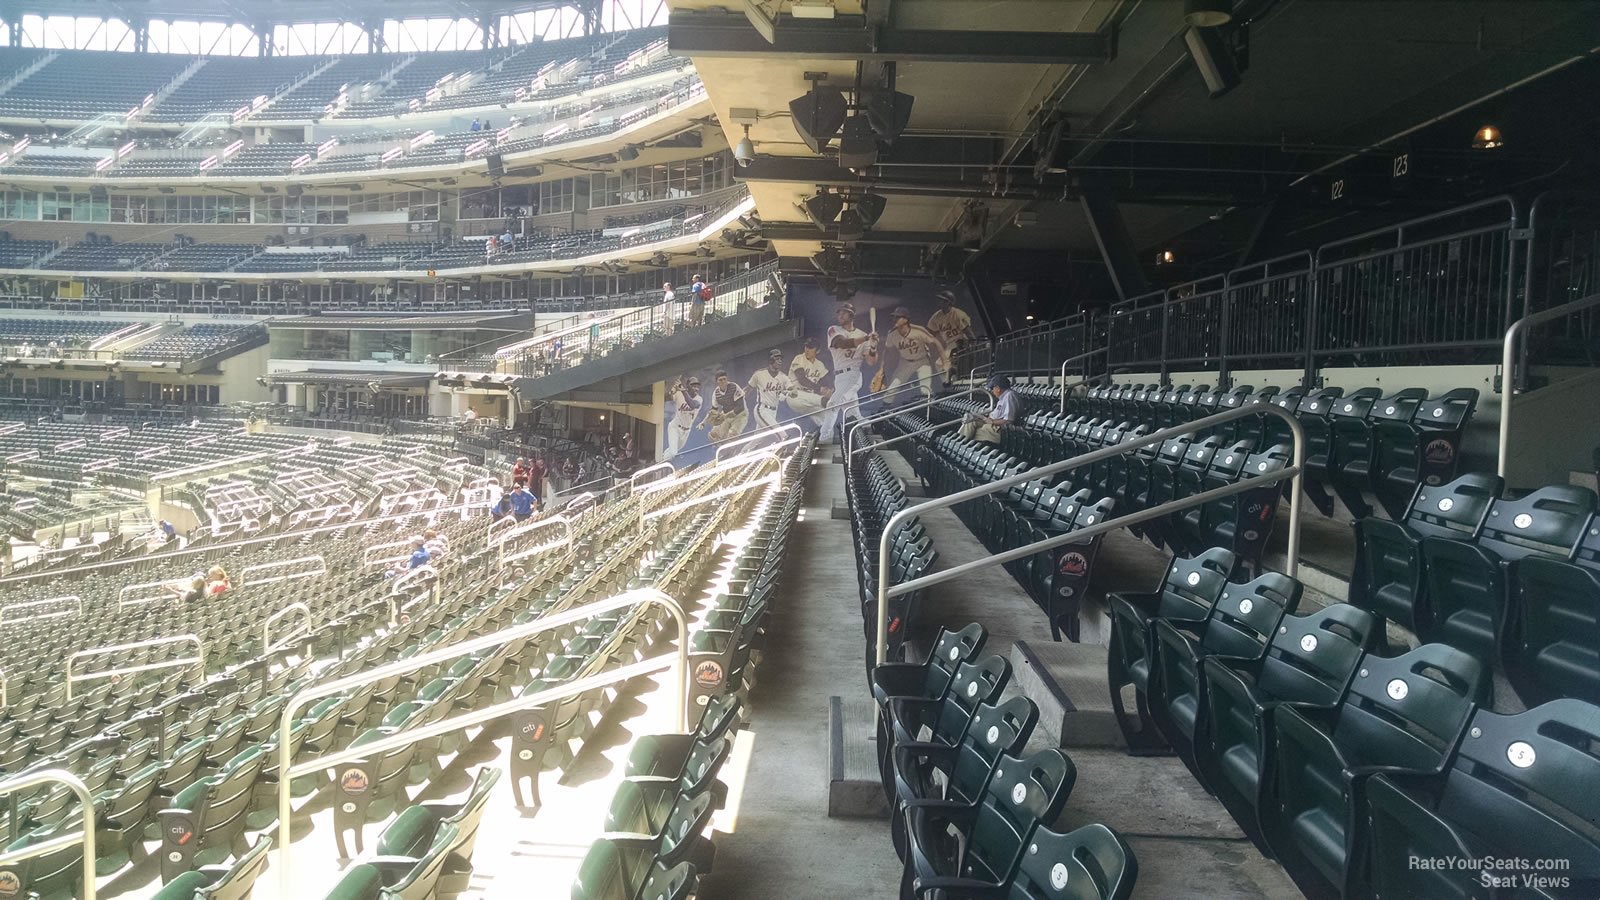 shade and cover around section 124